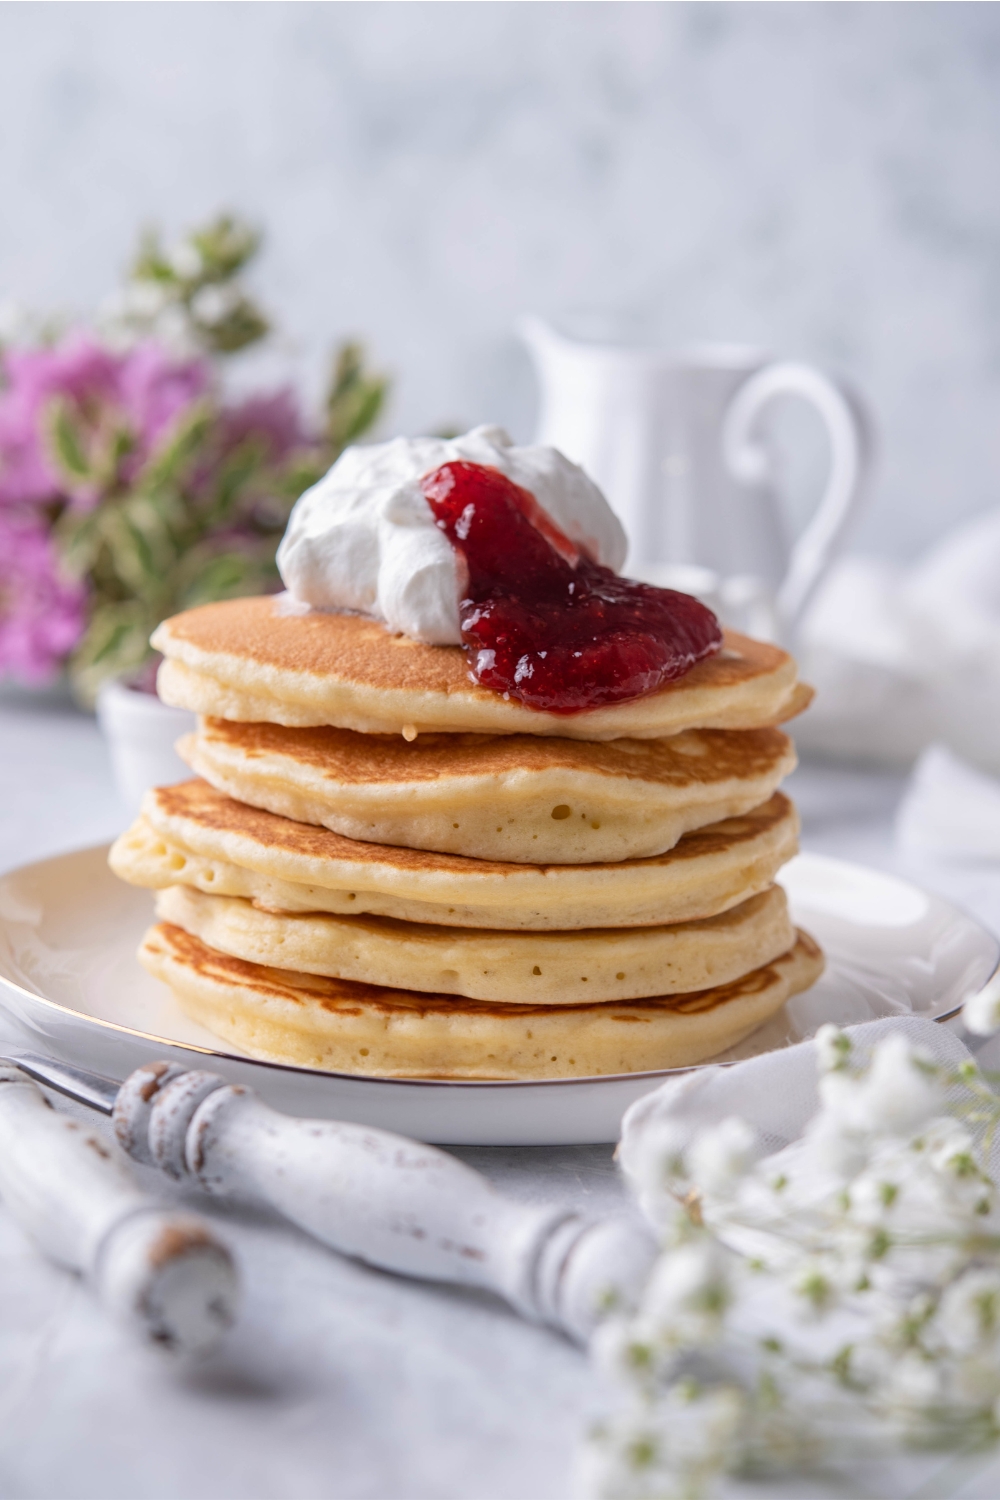 A close up of a stack of flapjacks topped with strawberry jam and whipped cream on a plate.